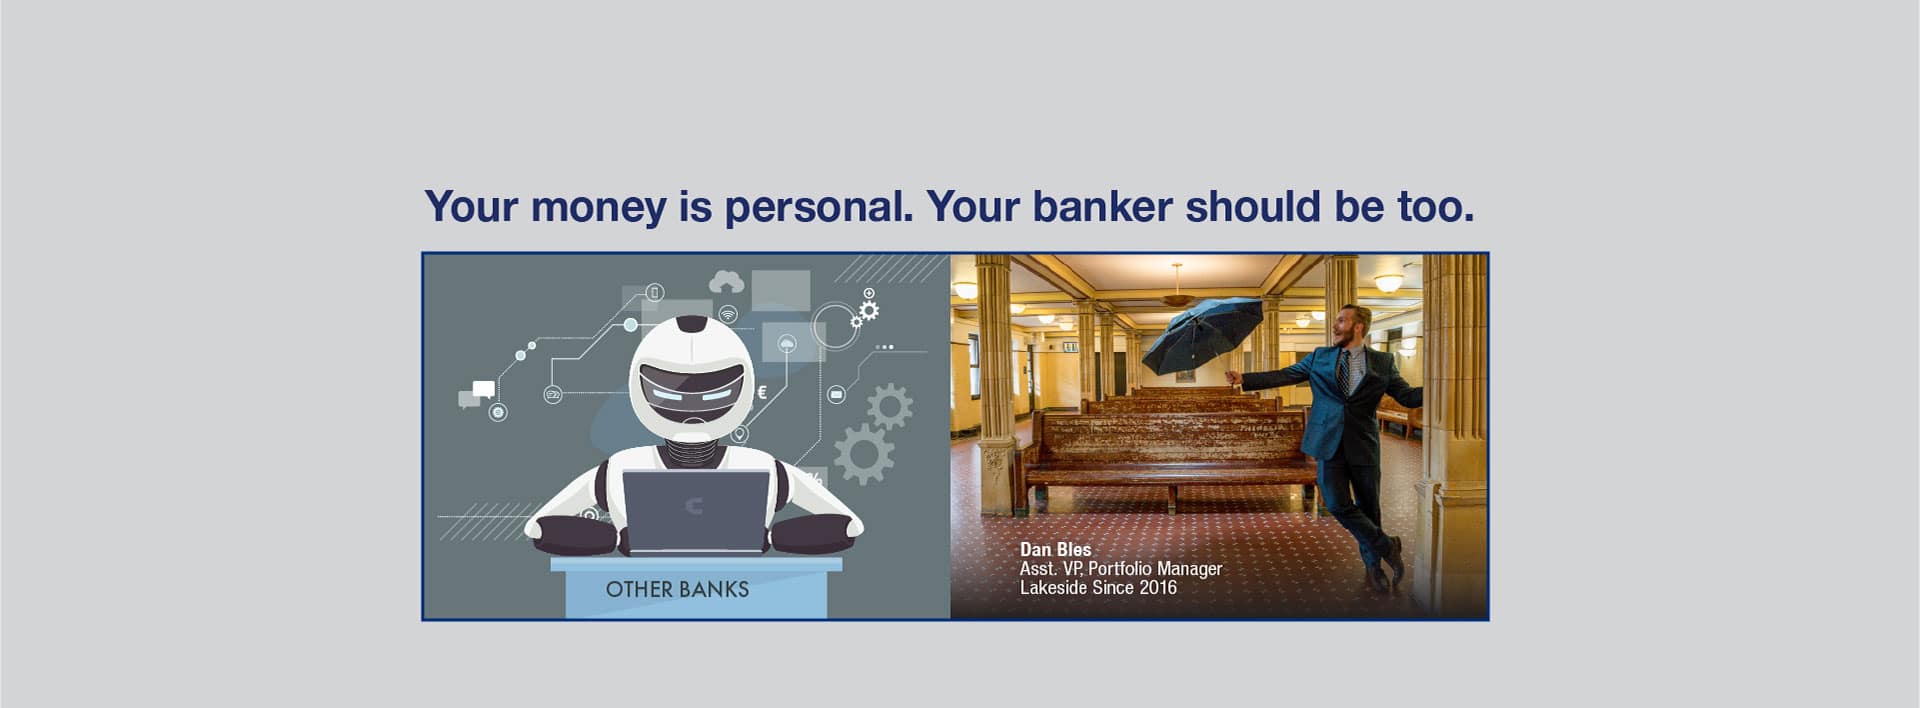 Your money is personal. Your banker should be, too